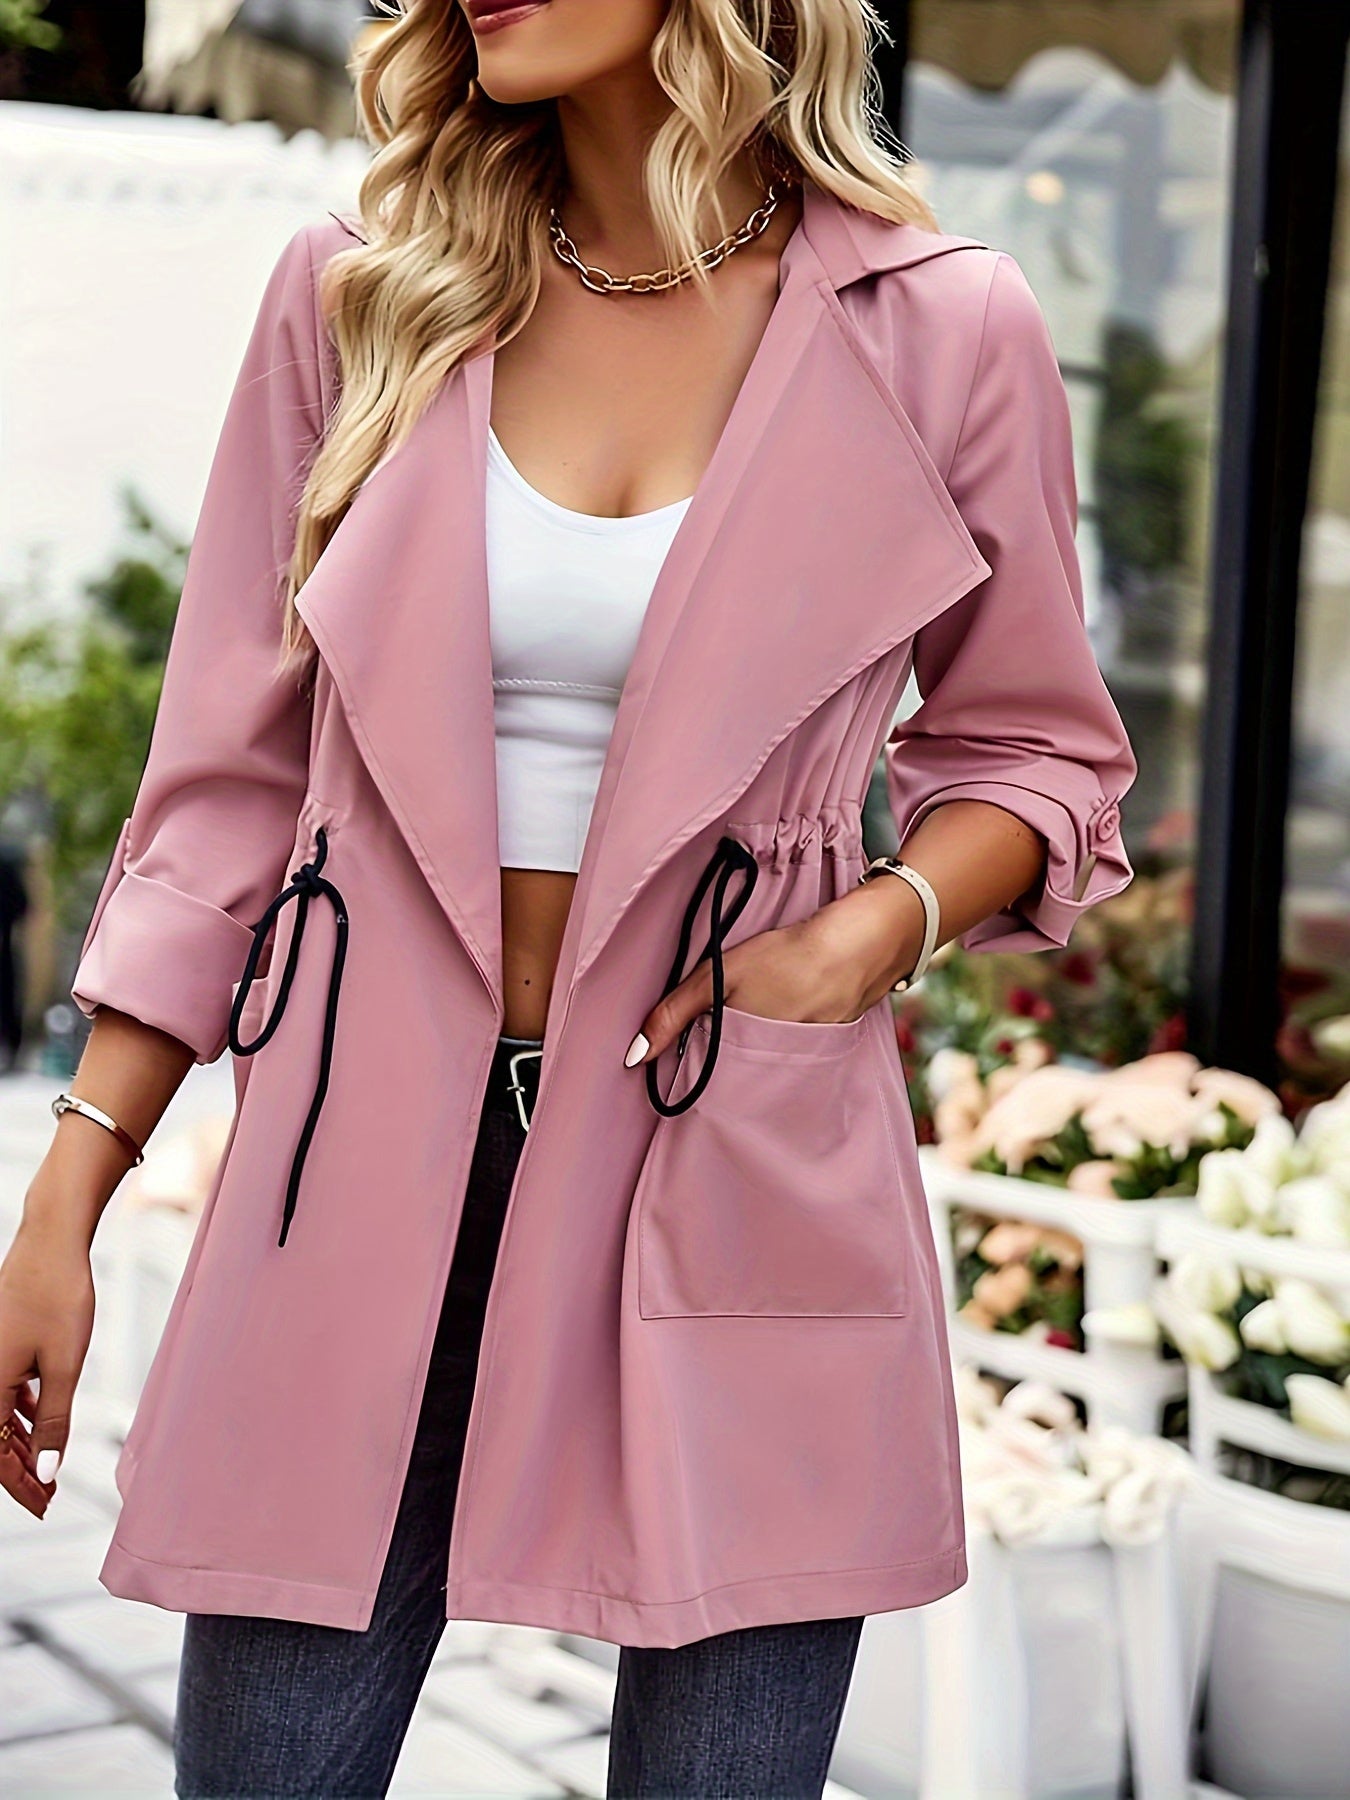 Plus Size Casual Trench Coat, Women's Plus Solid Drawstring Long Sleeve Open Front Lapel Collar Tunic Trench Coat